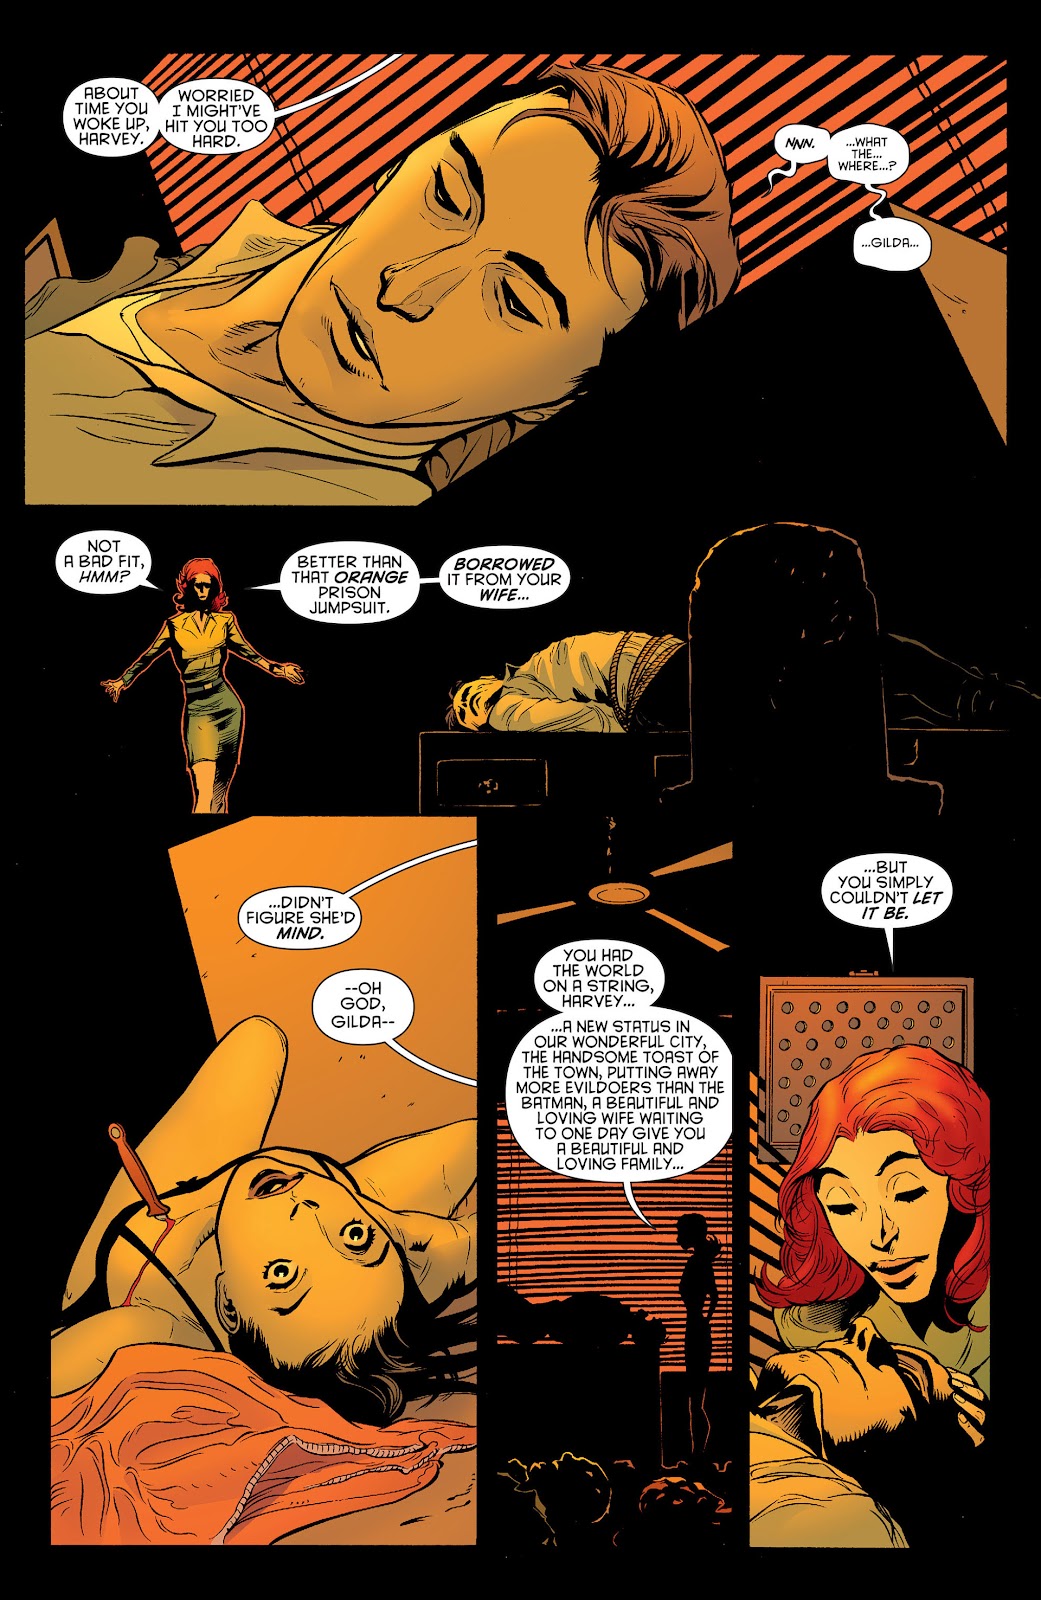 Batman and Robin (2011) issue 24 - Batman and Two-Face - Page 15